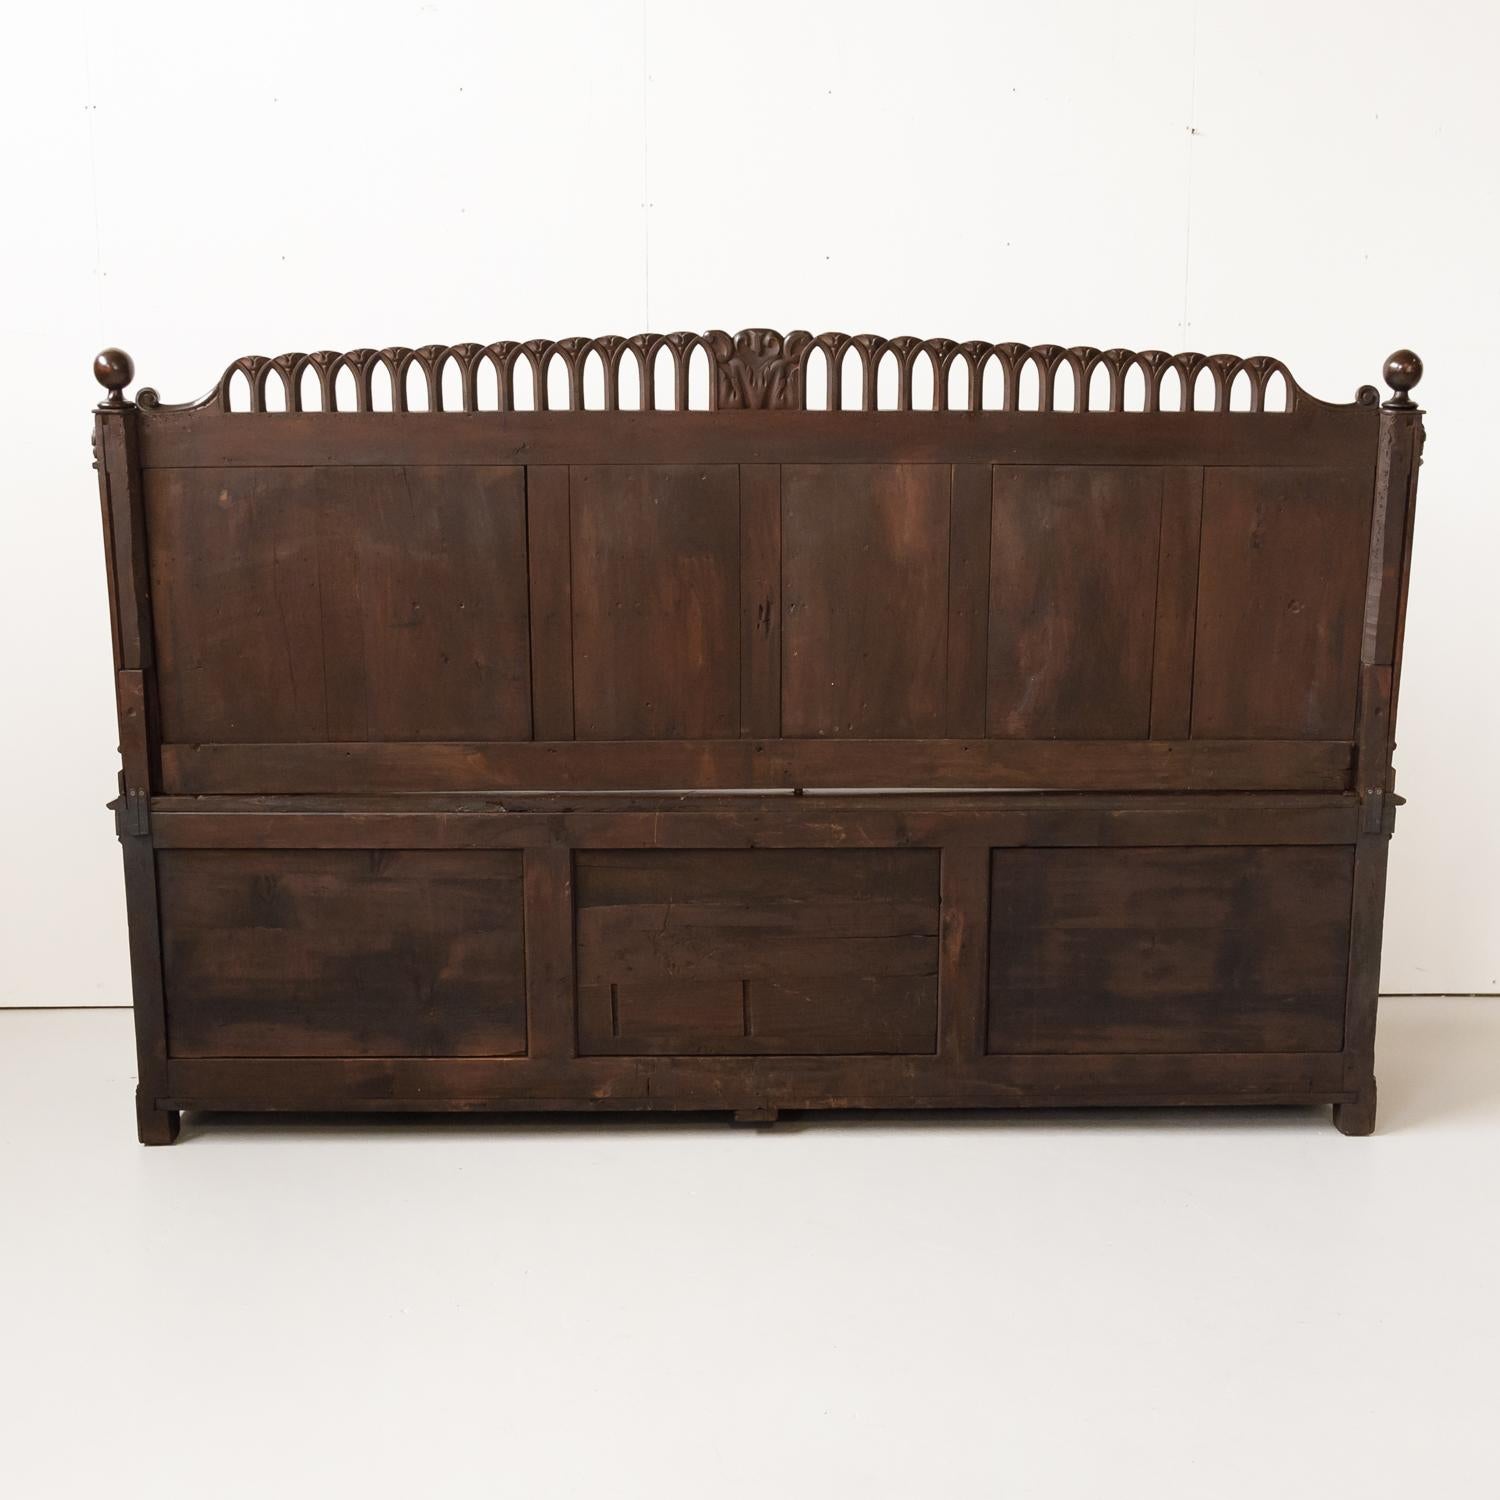 18th Century French Gothic Revival Period Walnut Settle or Hall Bench with Lift  For Sale 15